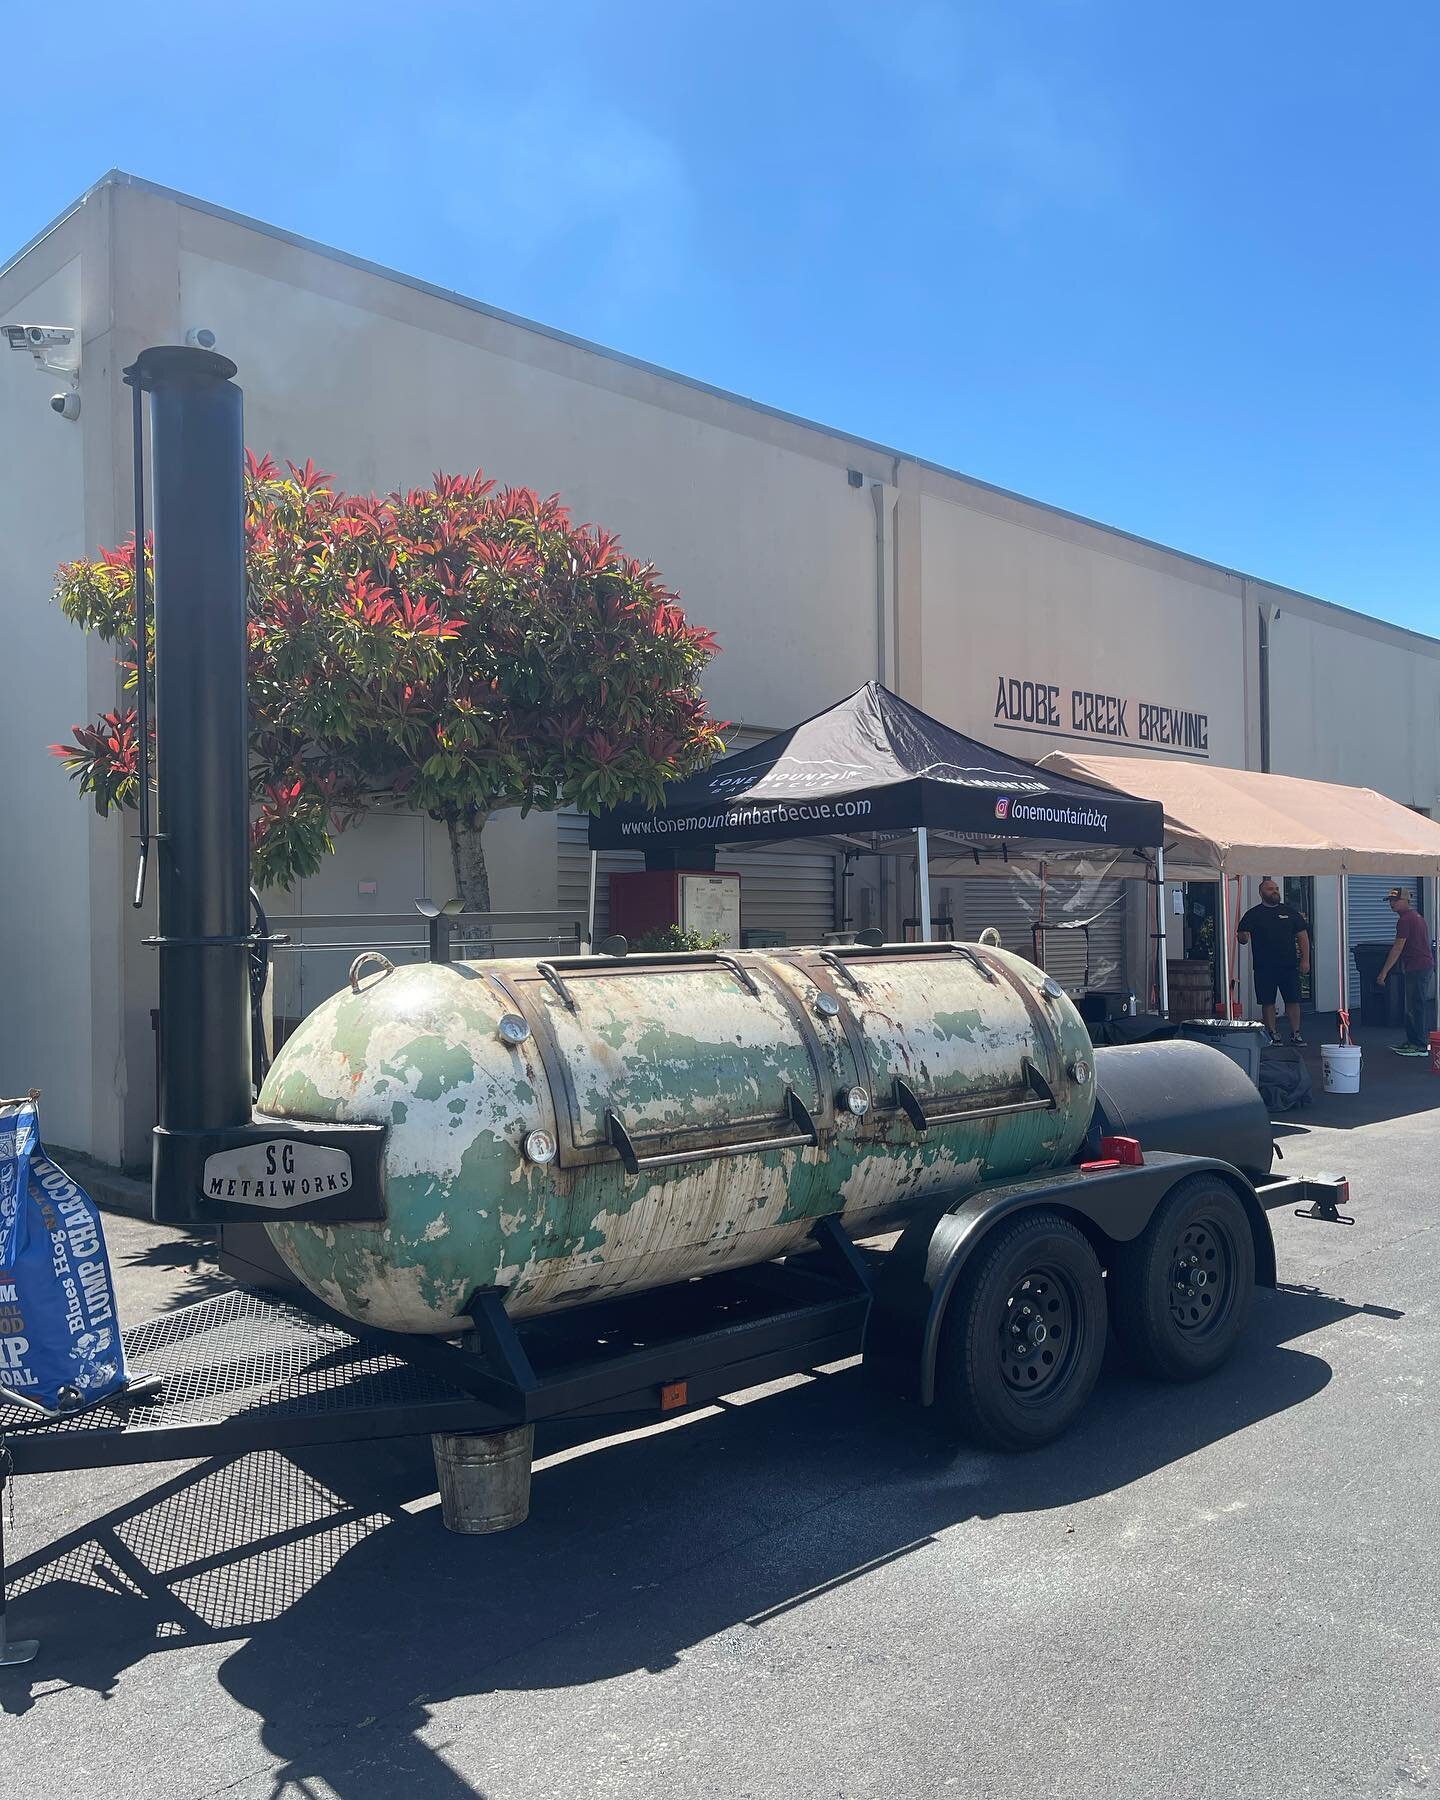 Chris and the @lonemountainbbq crew are ready to serve up their smoky goodness today in Novato starting at 3!
#craftbeer #marin #bbq